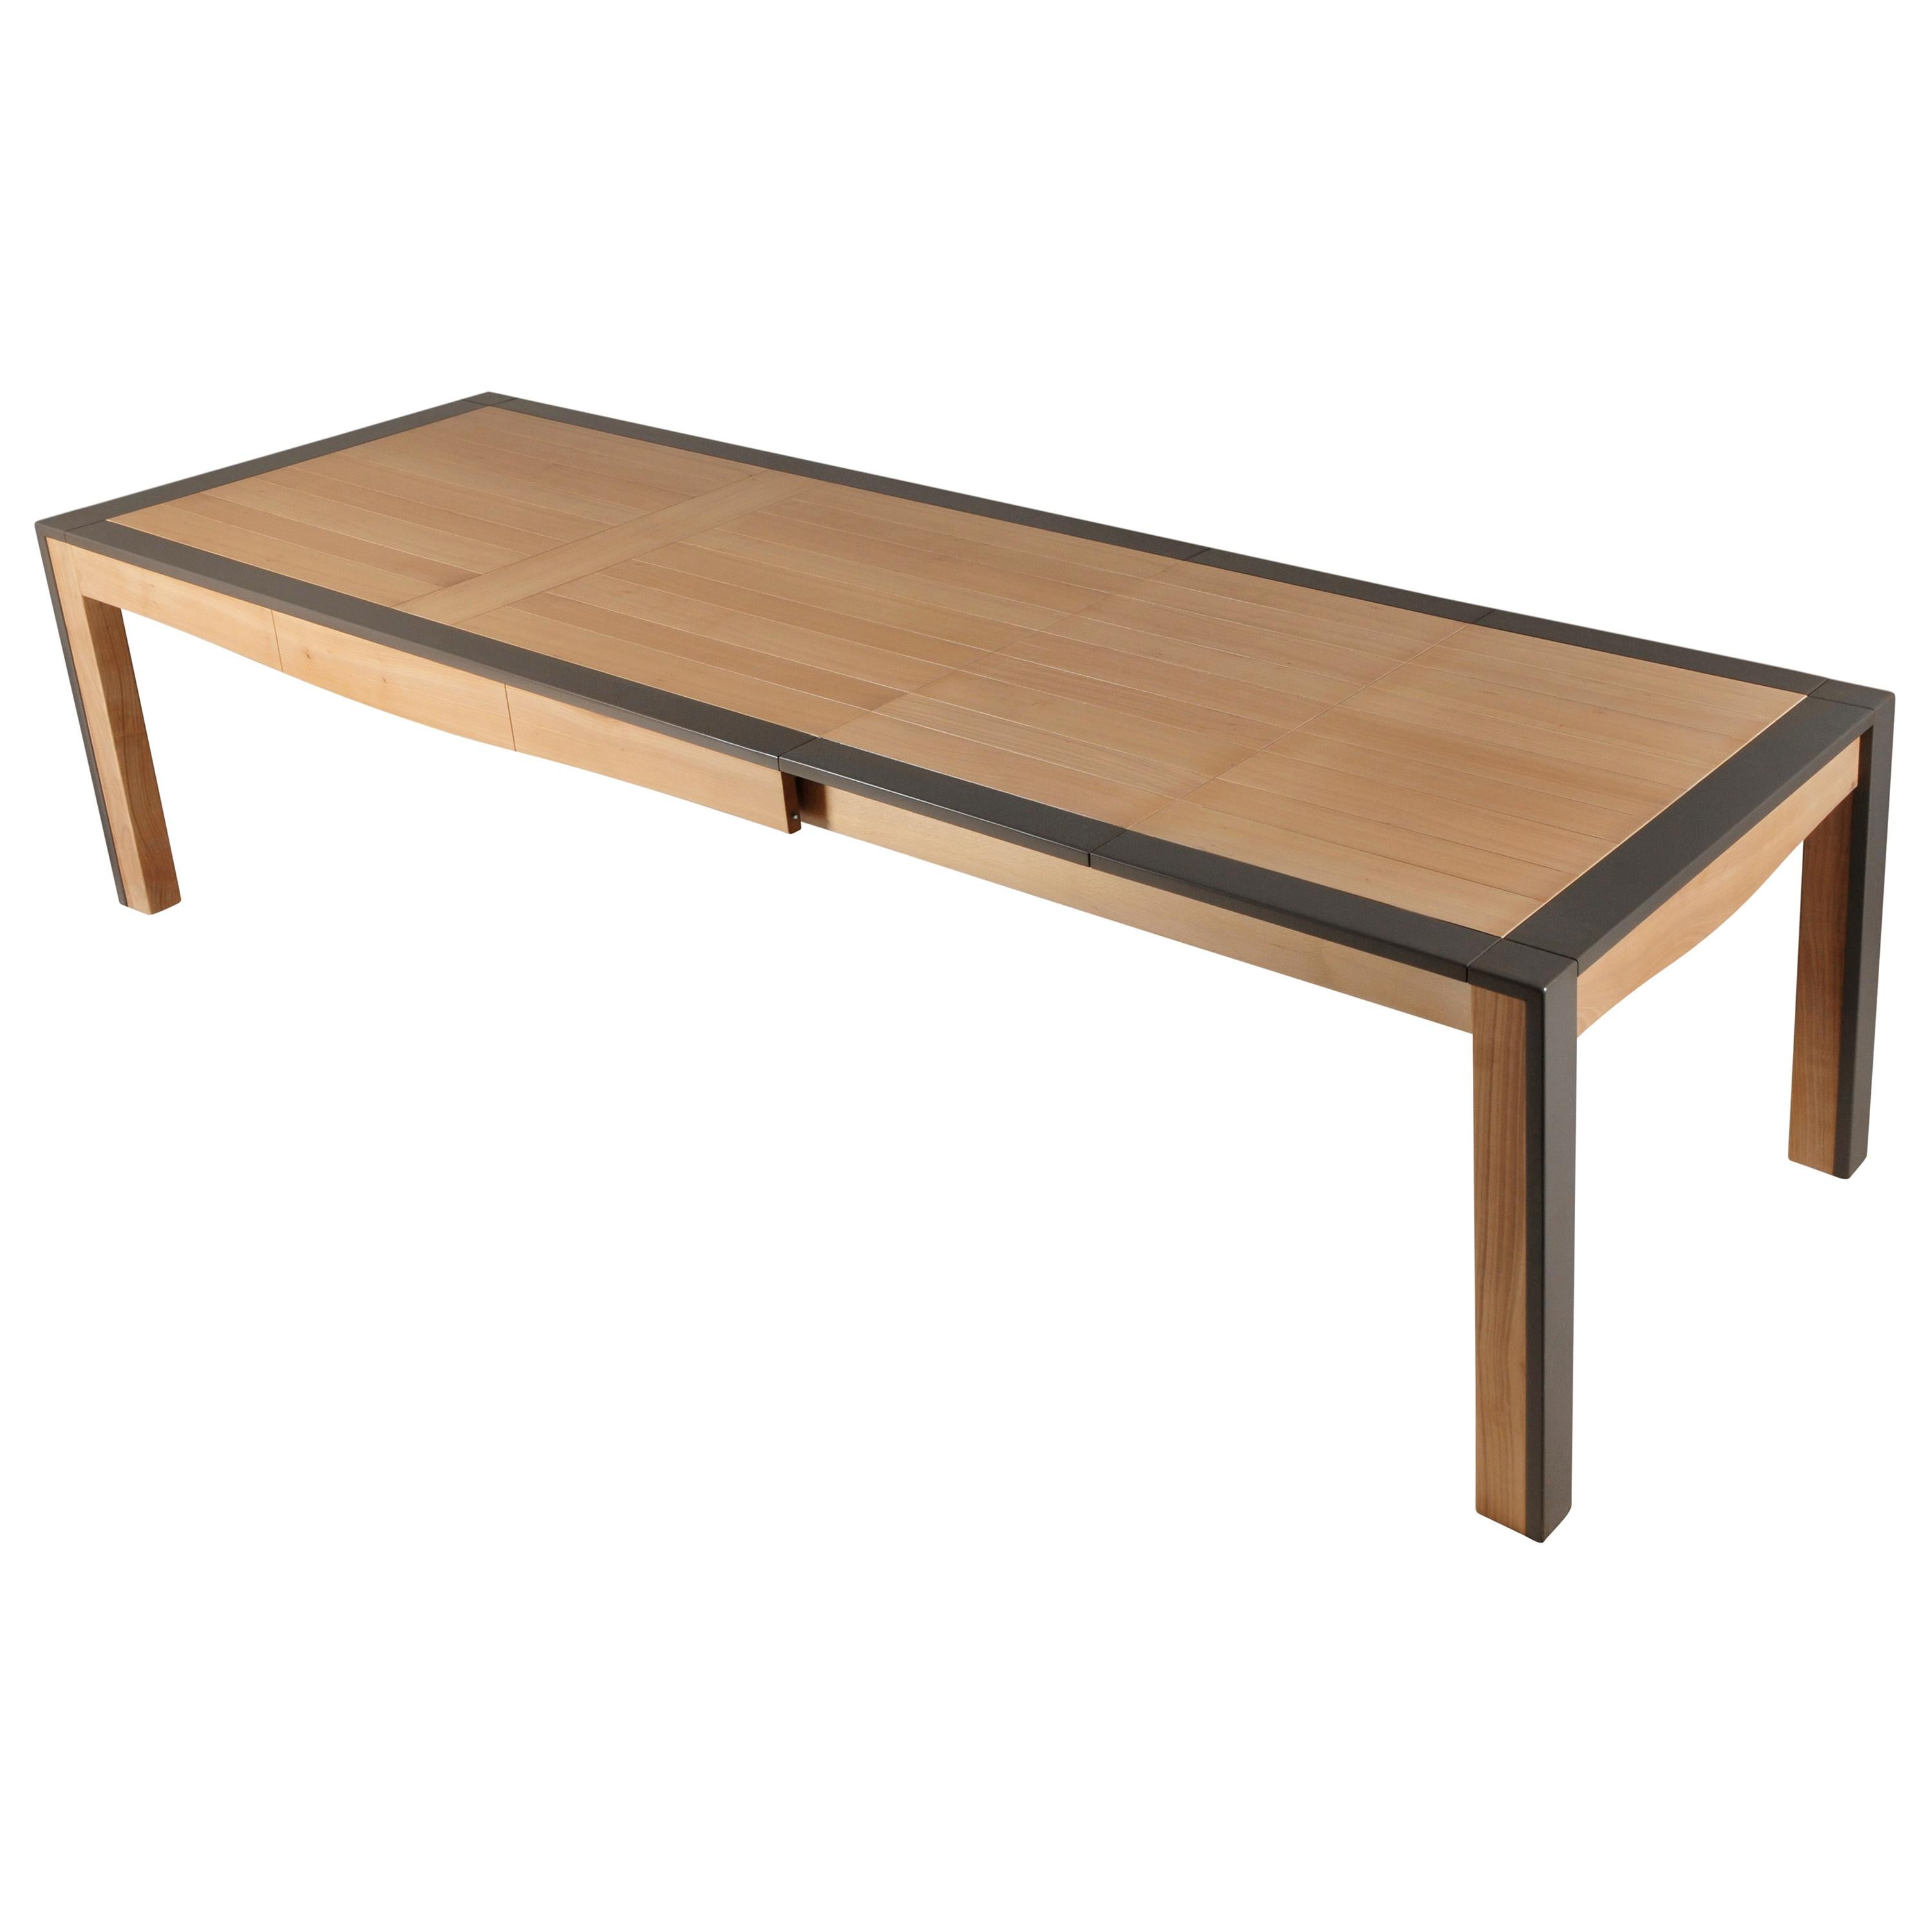 This rectangular dining table is made of Cherry wood and designed by Christophe Lecomte a French Designer. Christophe likes to combine right contemporary lines with smooths curves under the table top.


The paneling top opens at the foot end for